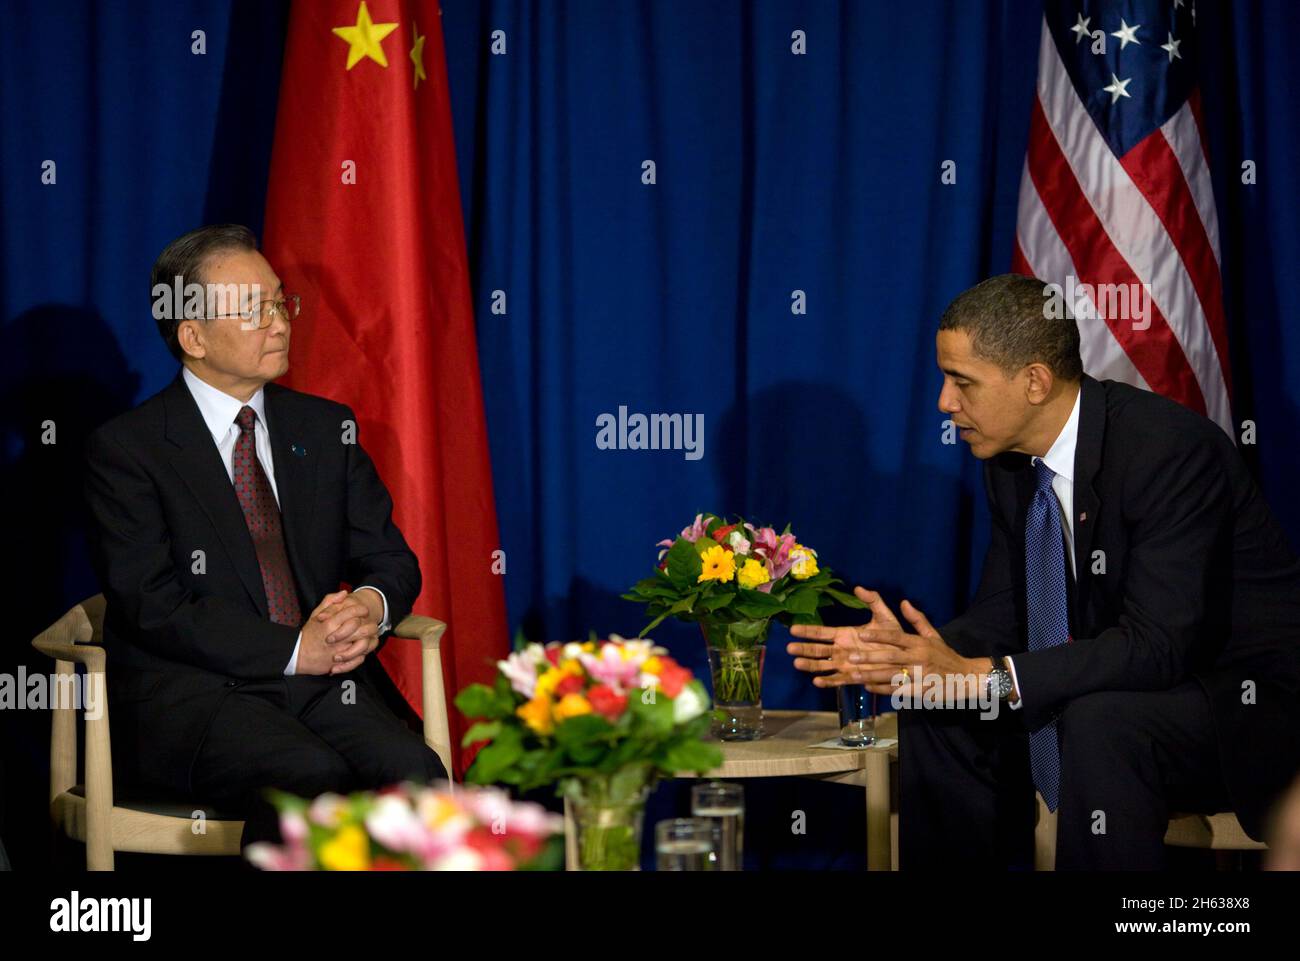 President Barack Obama meets with Chinese Premier Wen Jiabao during a bilateral at the United Nations Climate Change Conference in Copenhagen, Denmark, Dec. 18, 2009 Stock Photo